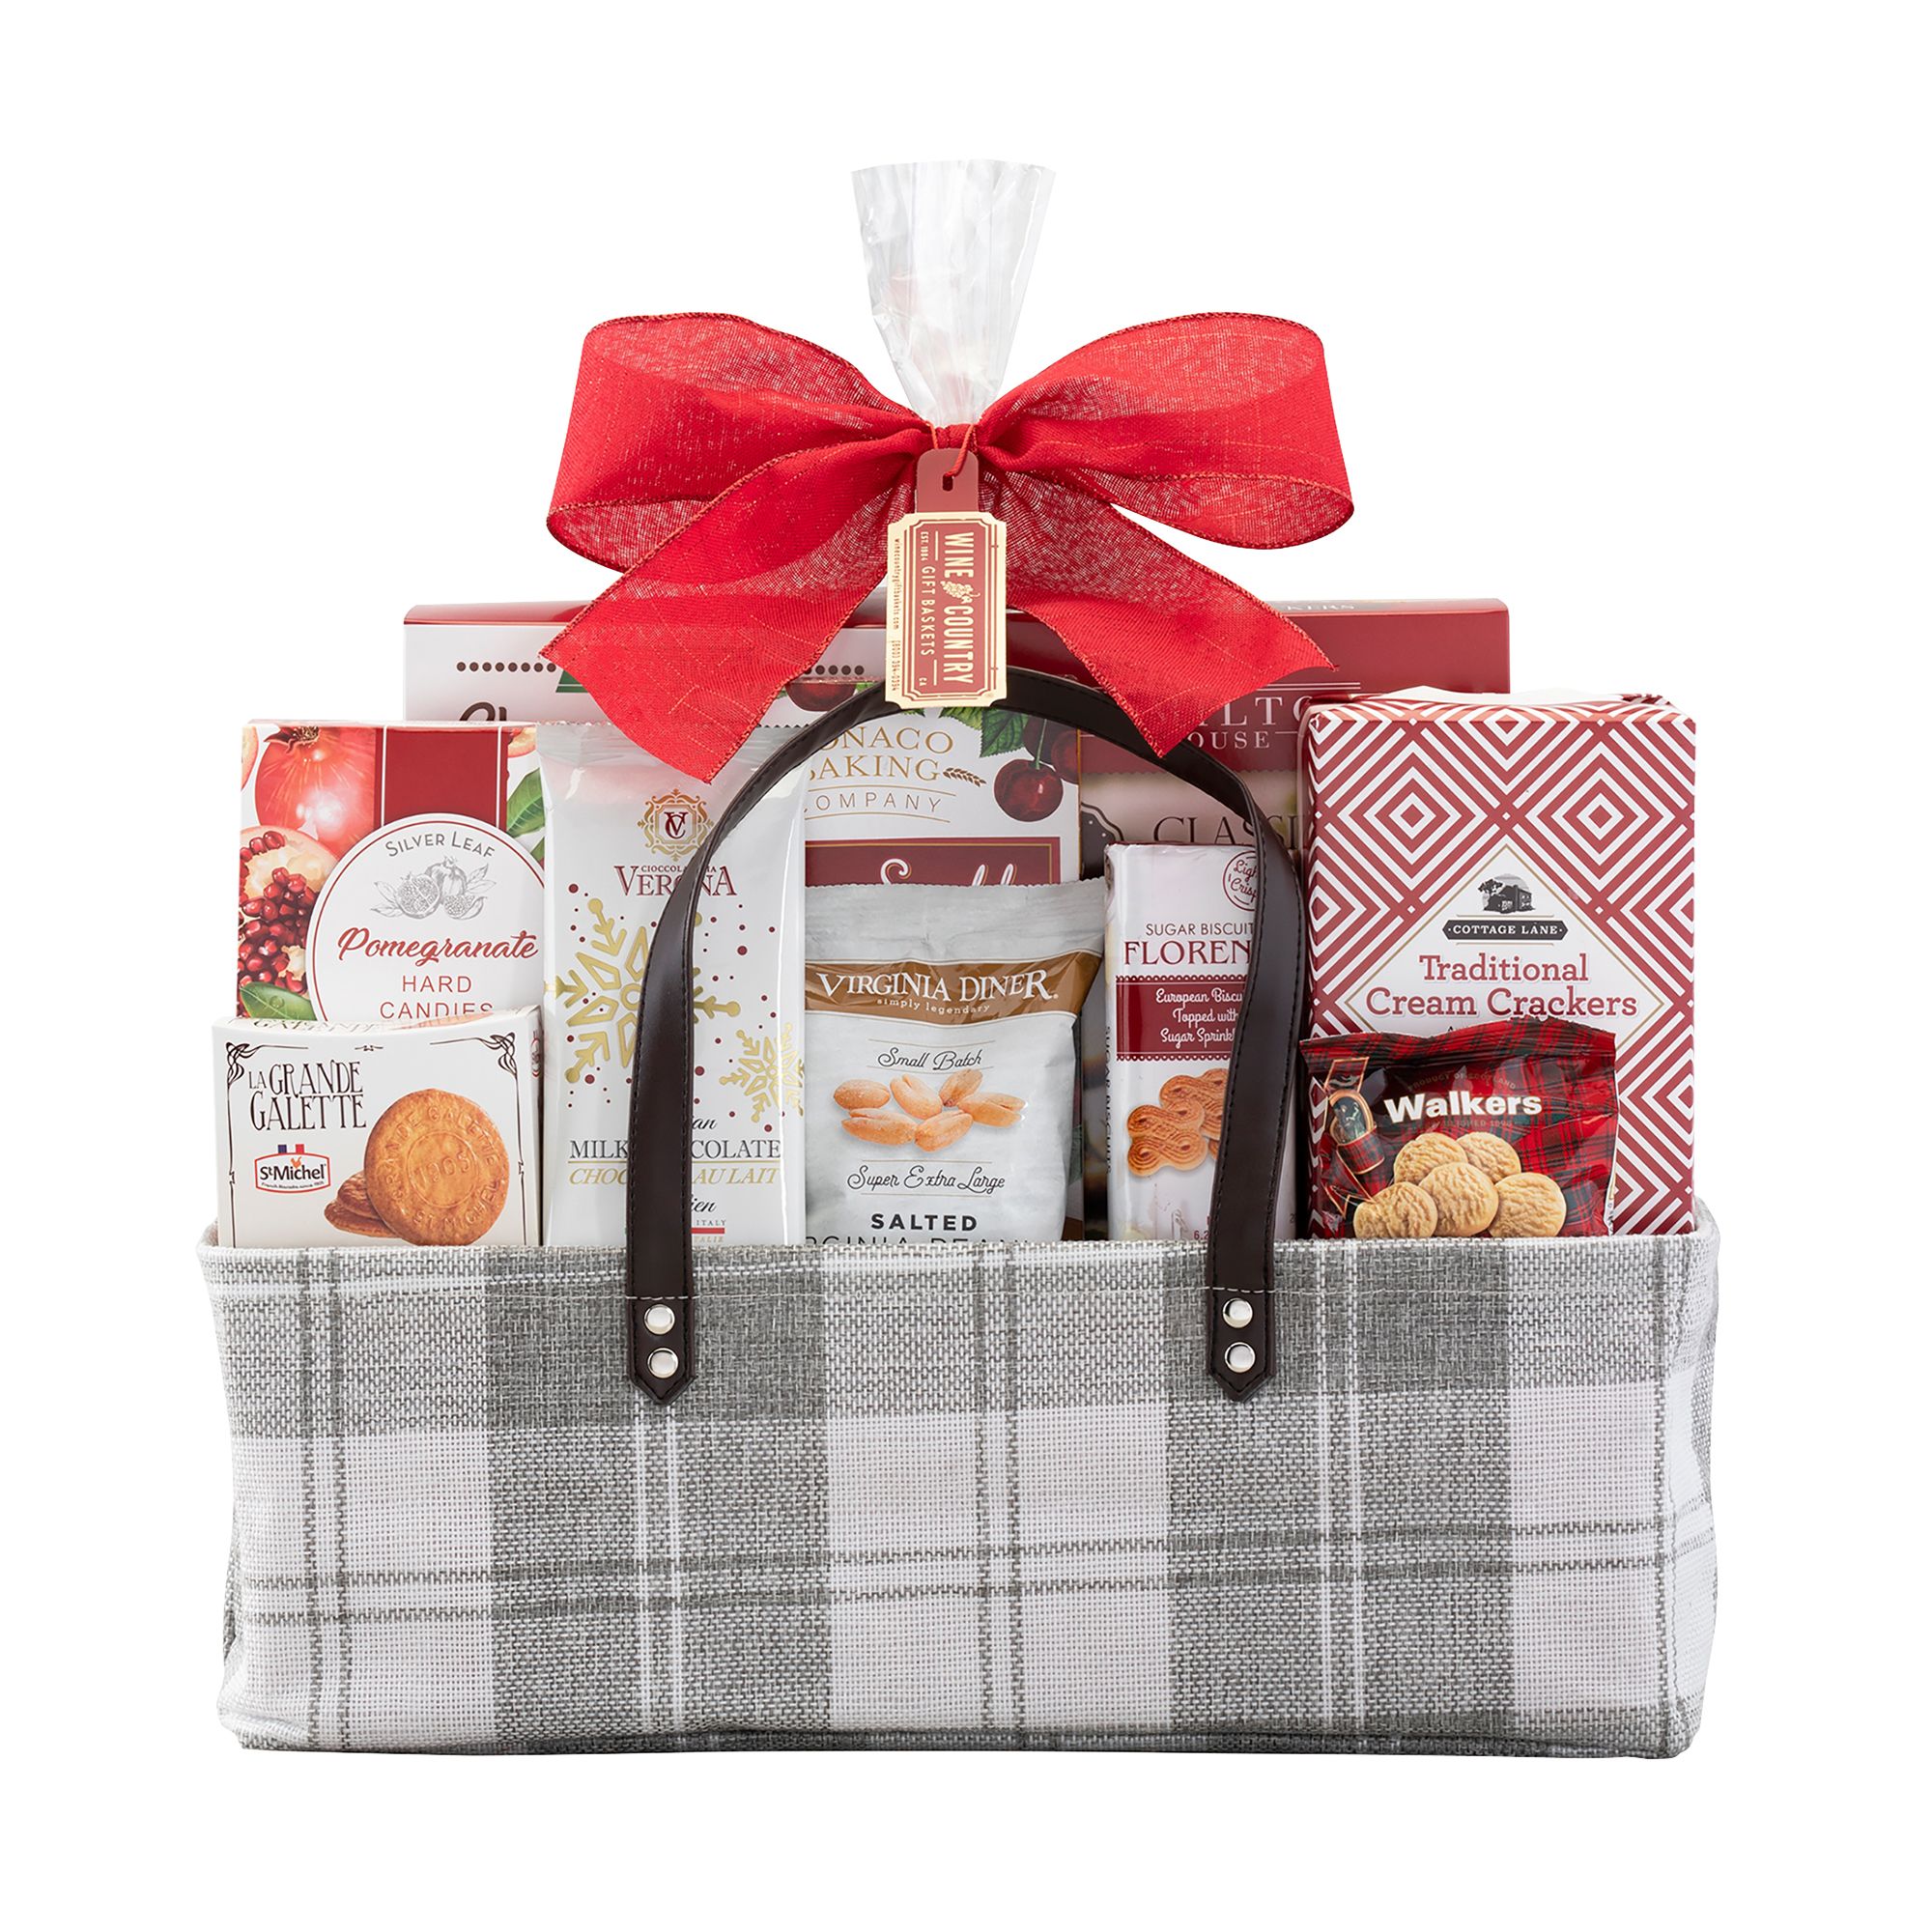 HUGE New Home Gift Basket w/A Vast Array of Household Essentials